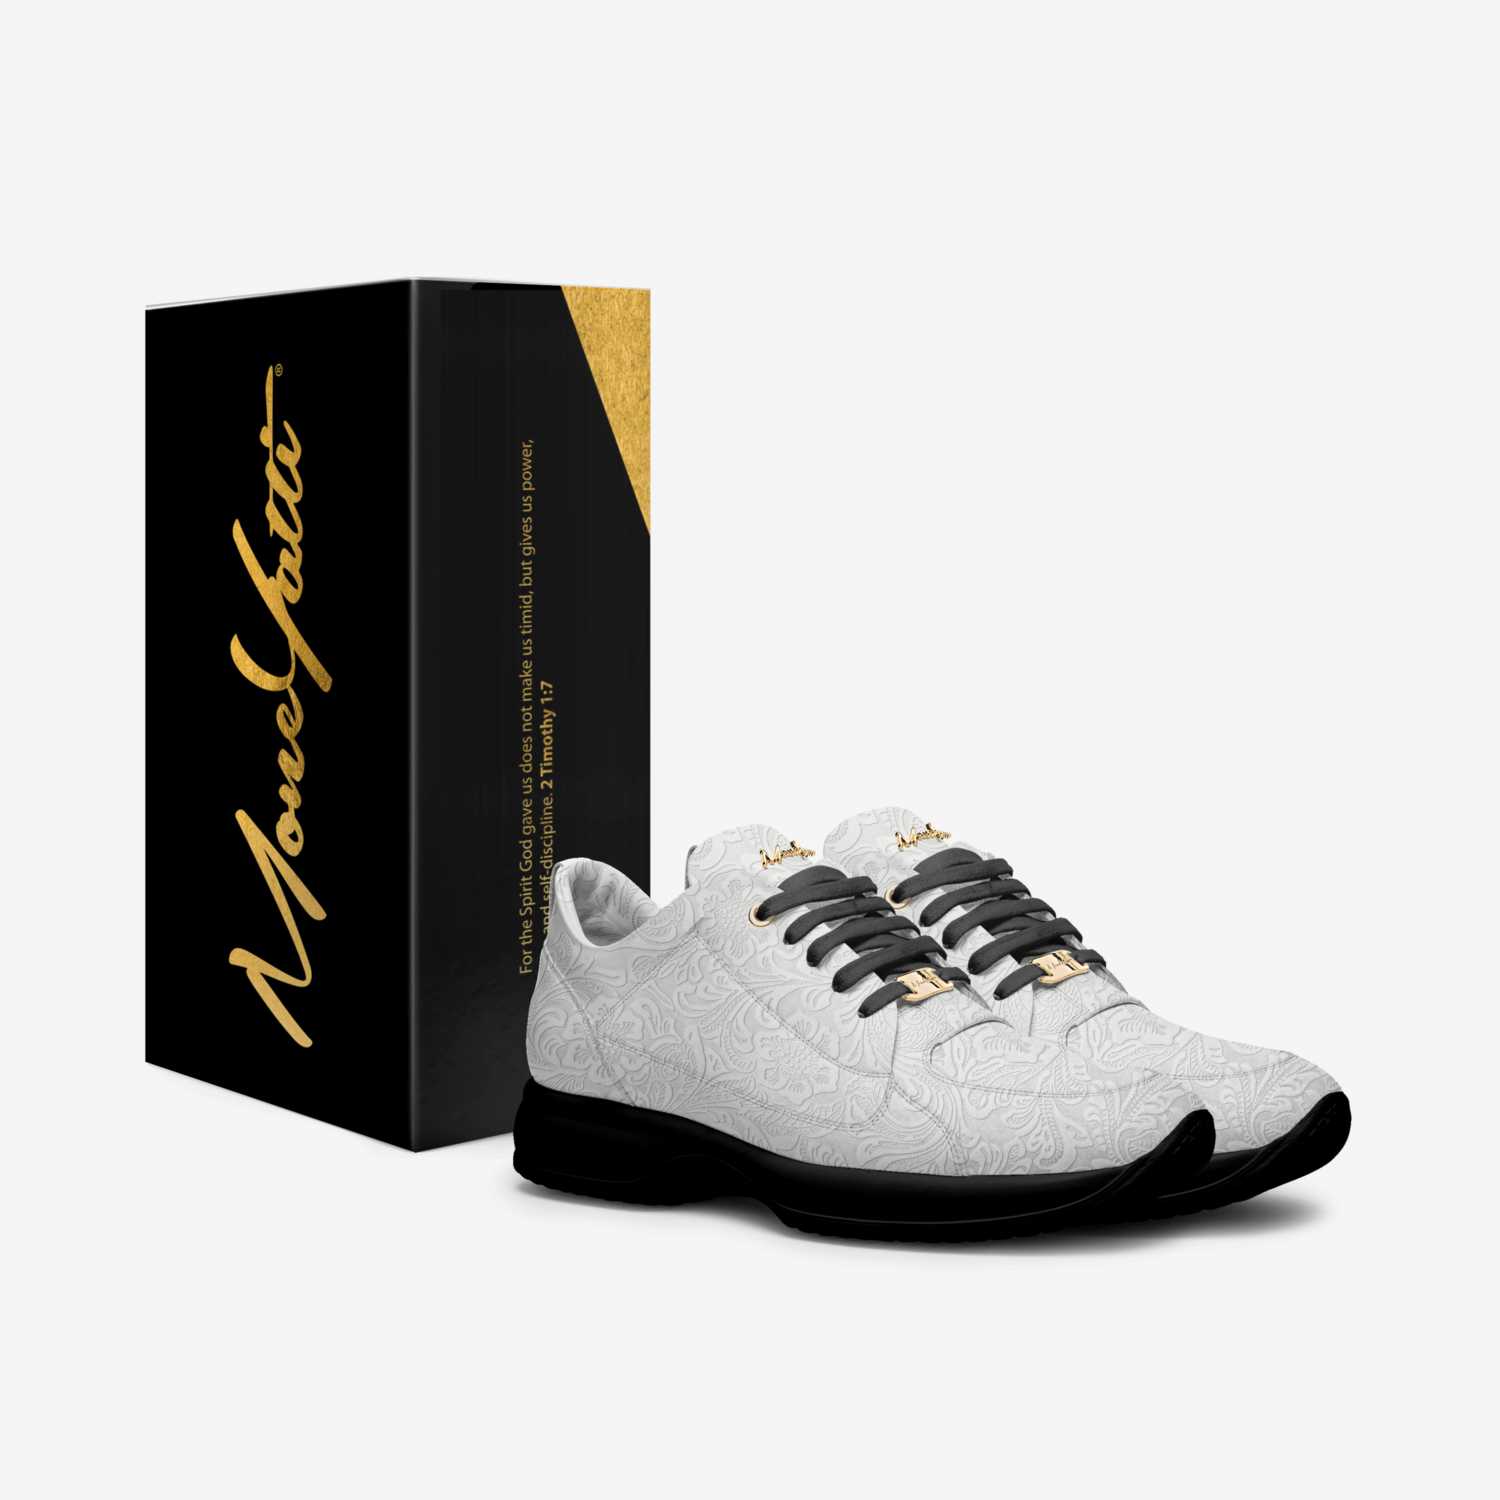 Masterpiece 060 custom made in Italy shoes by Moneyatti Brand | Box view